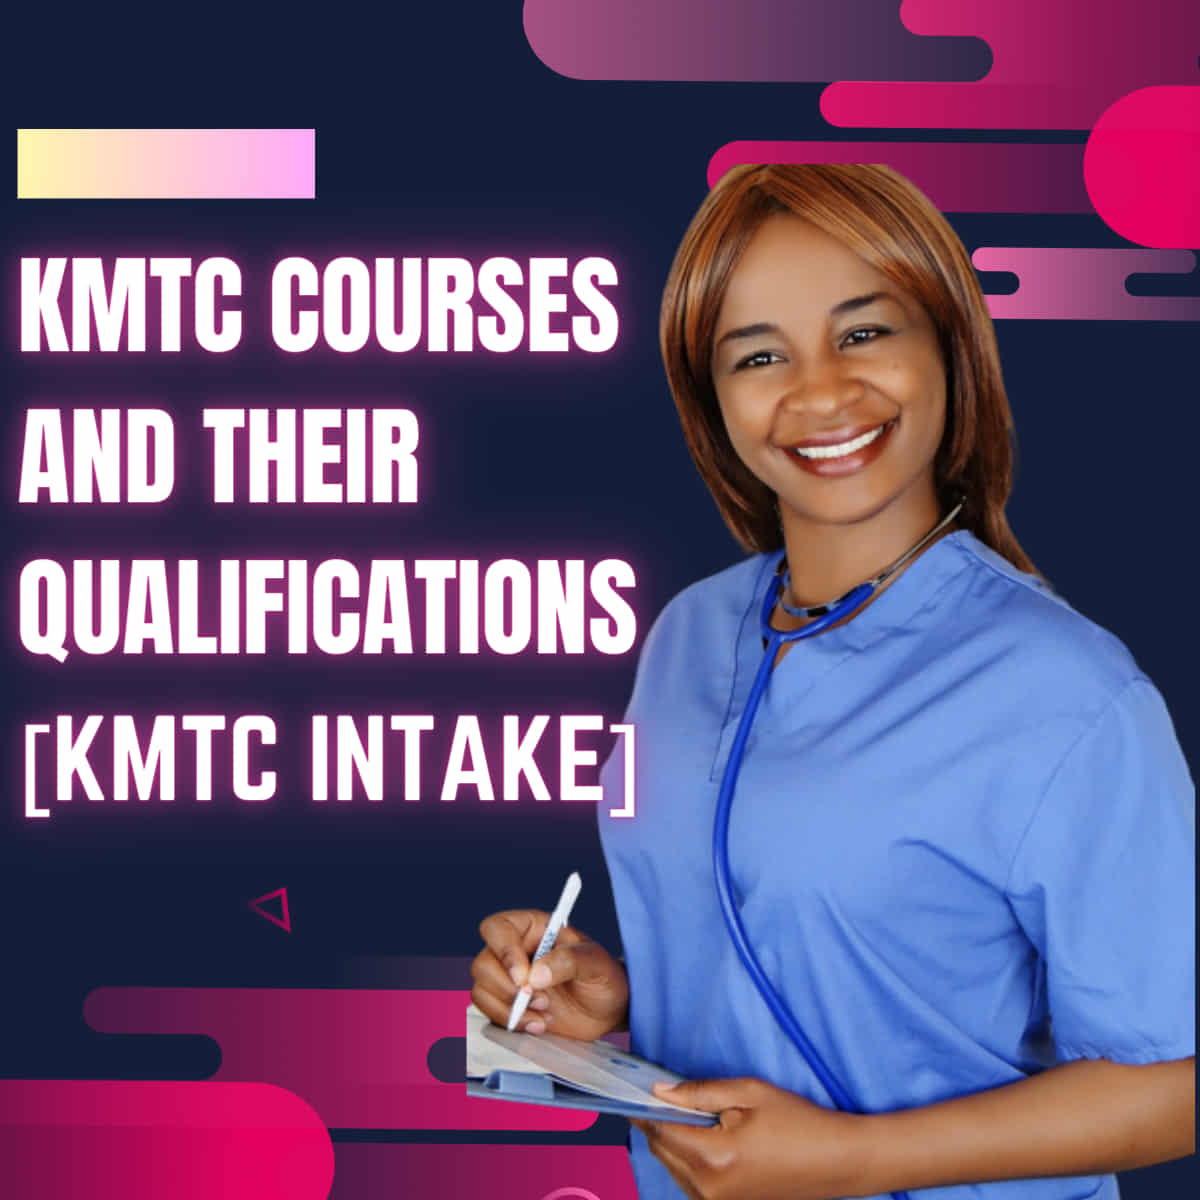 KMTC courses and qualifications